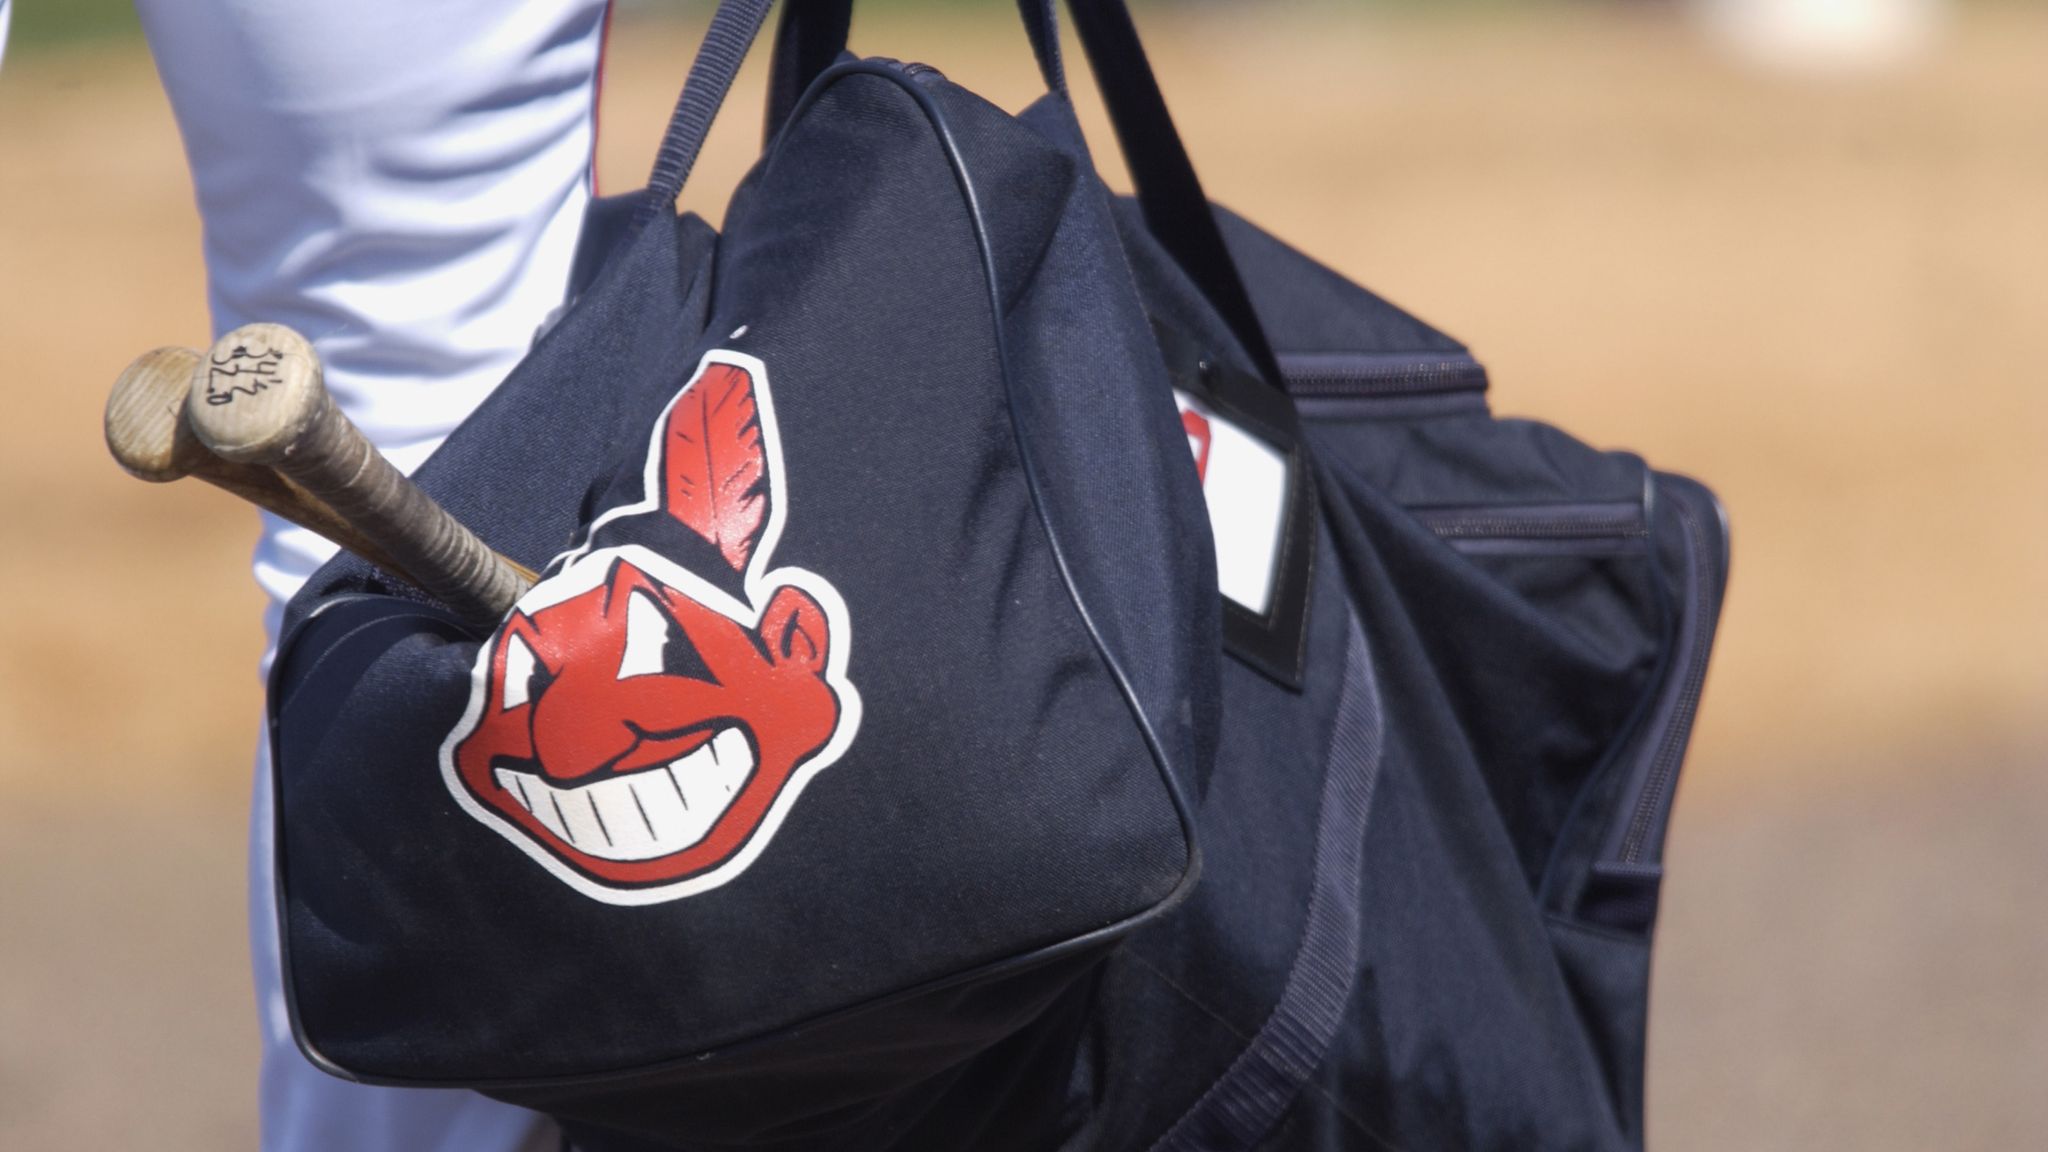 Cleveland Indians will remove Chief Wahoo logo in 2019